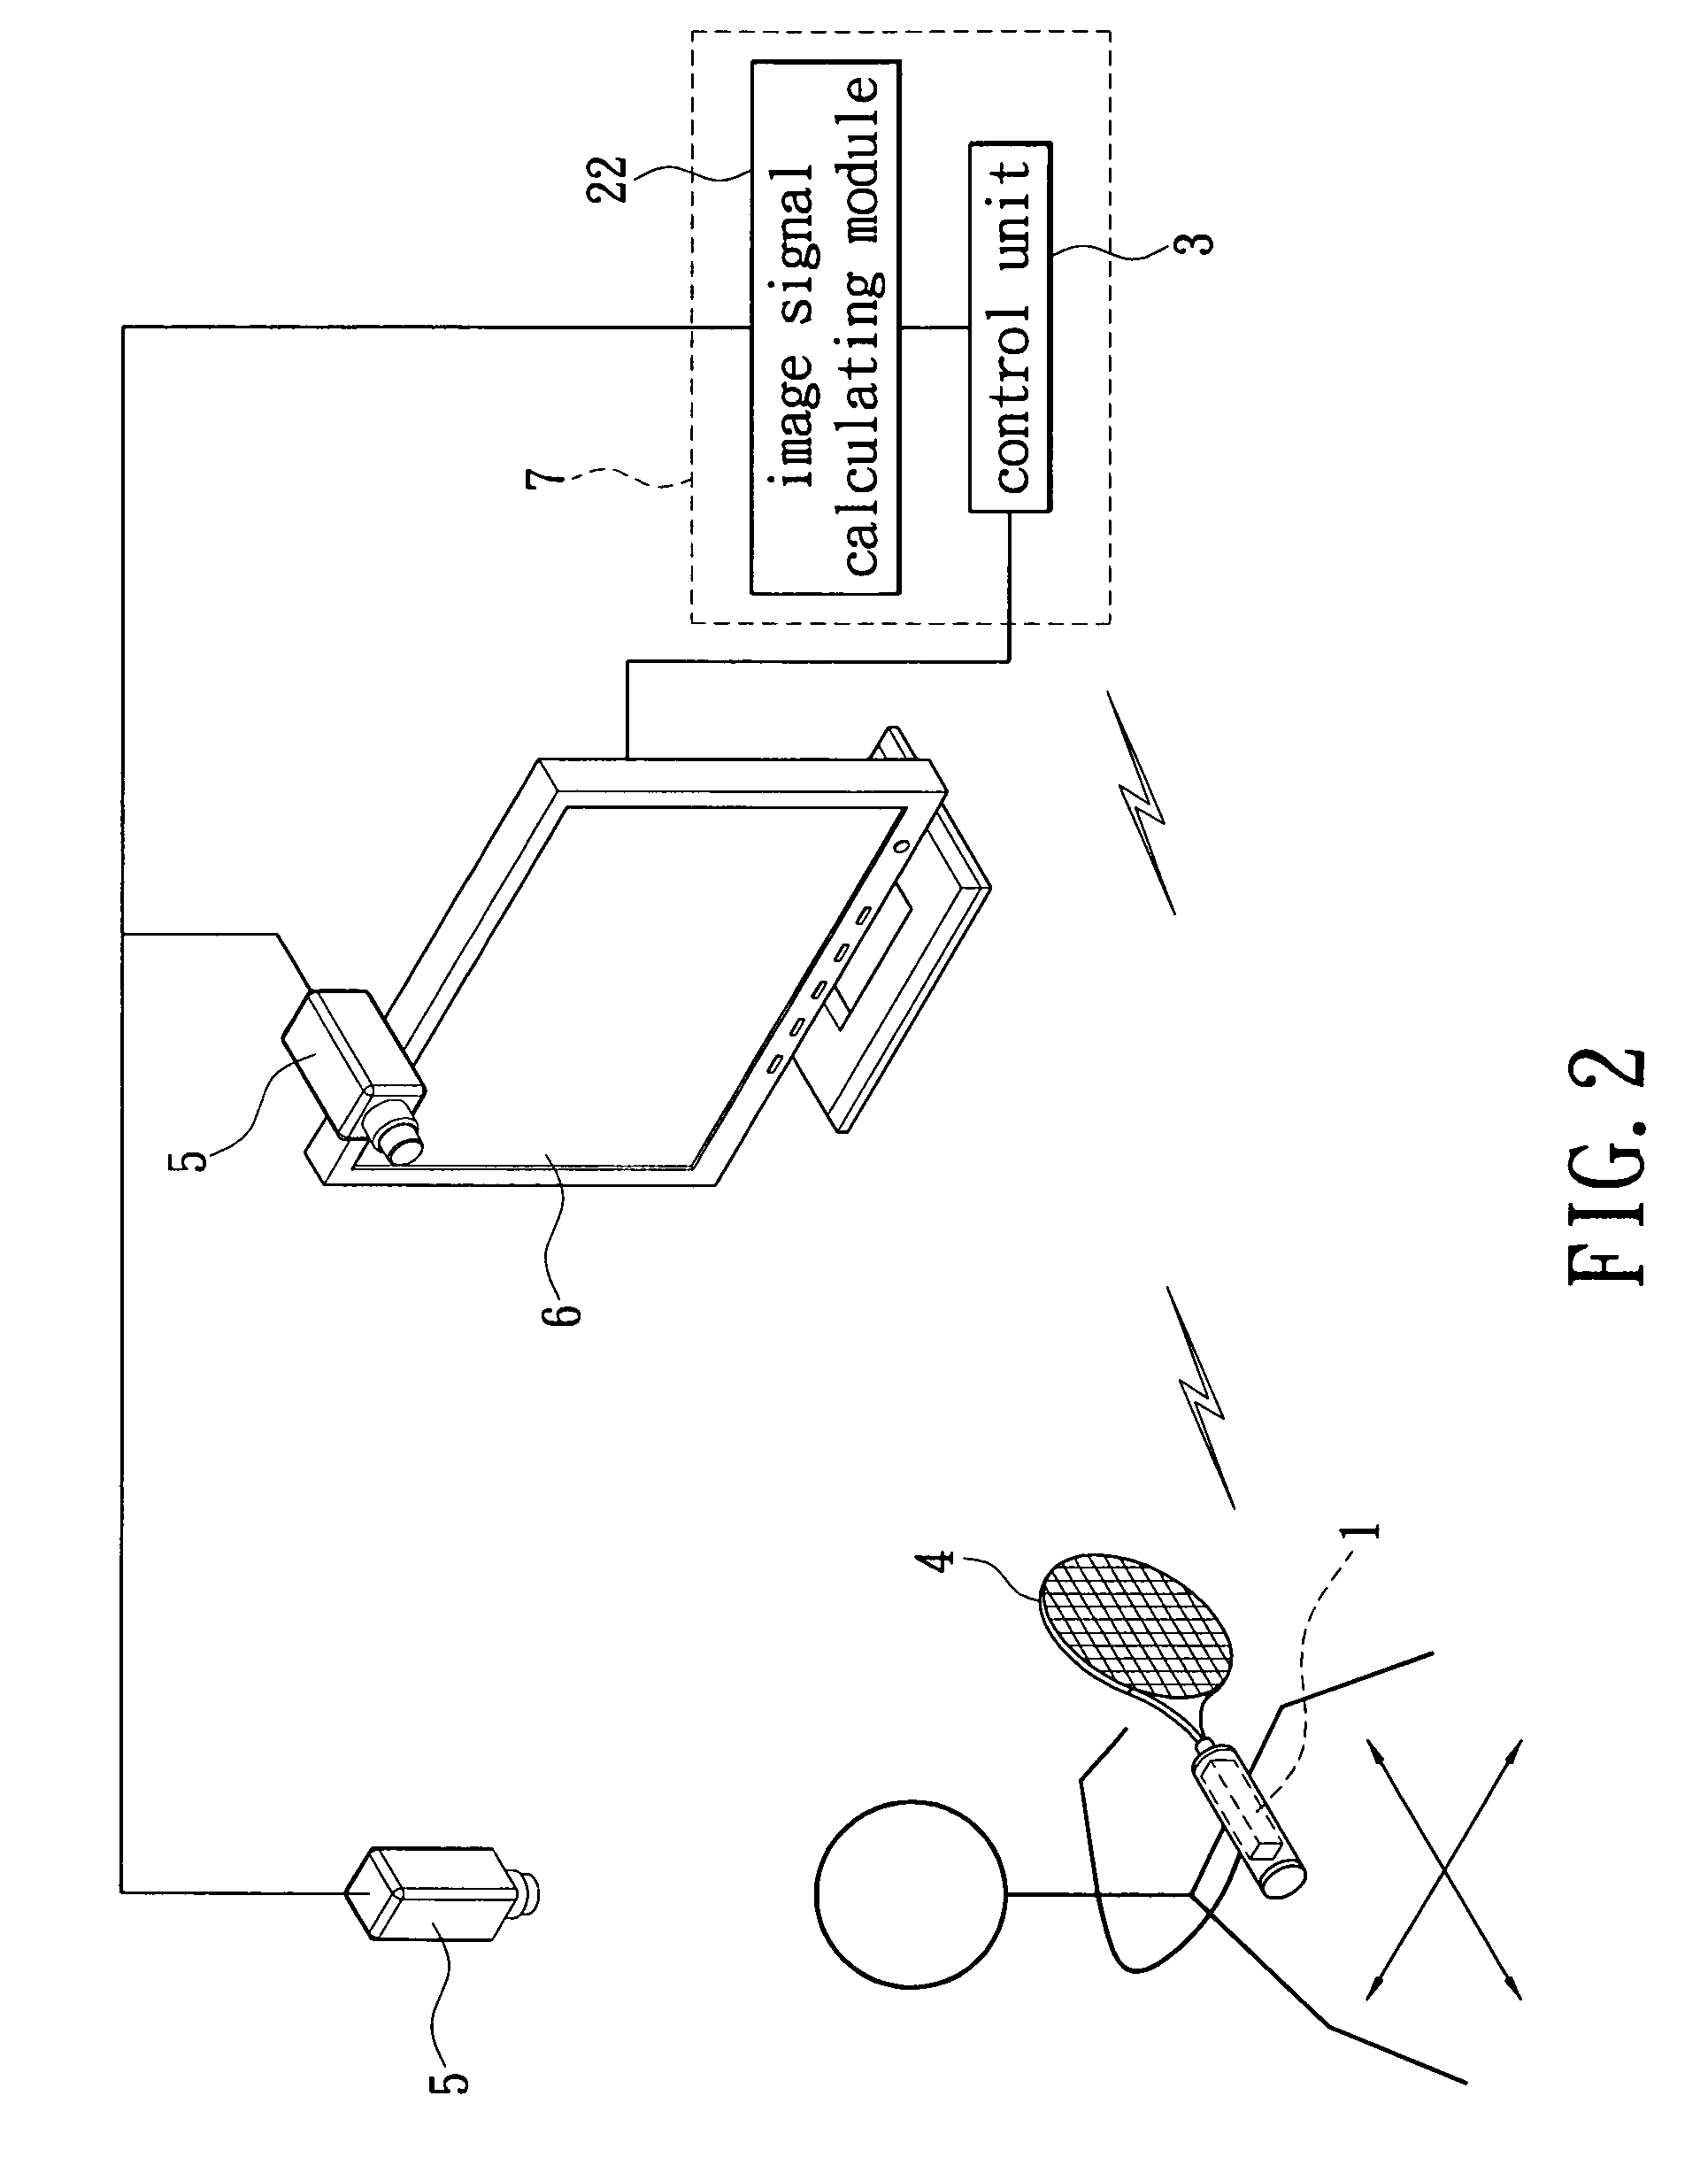 Electronic game controller with motion-sensing capability